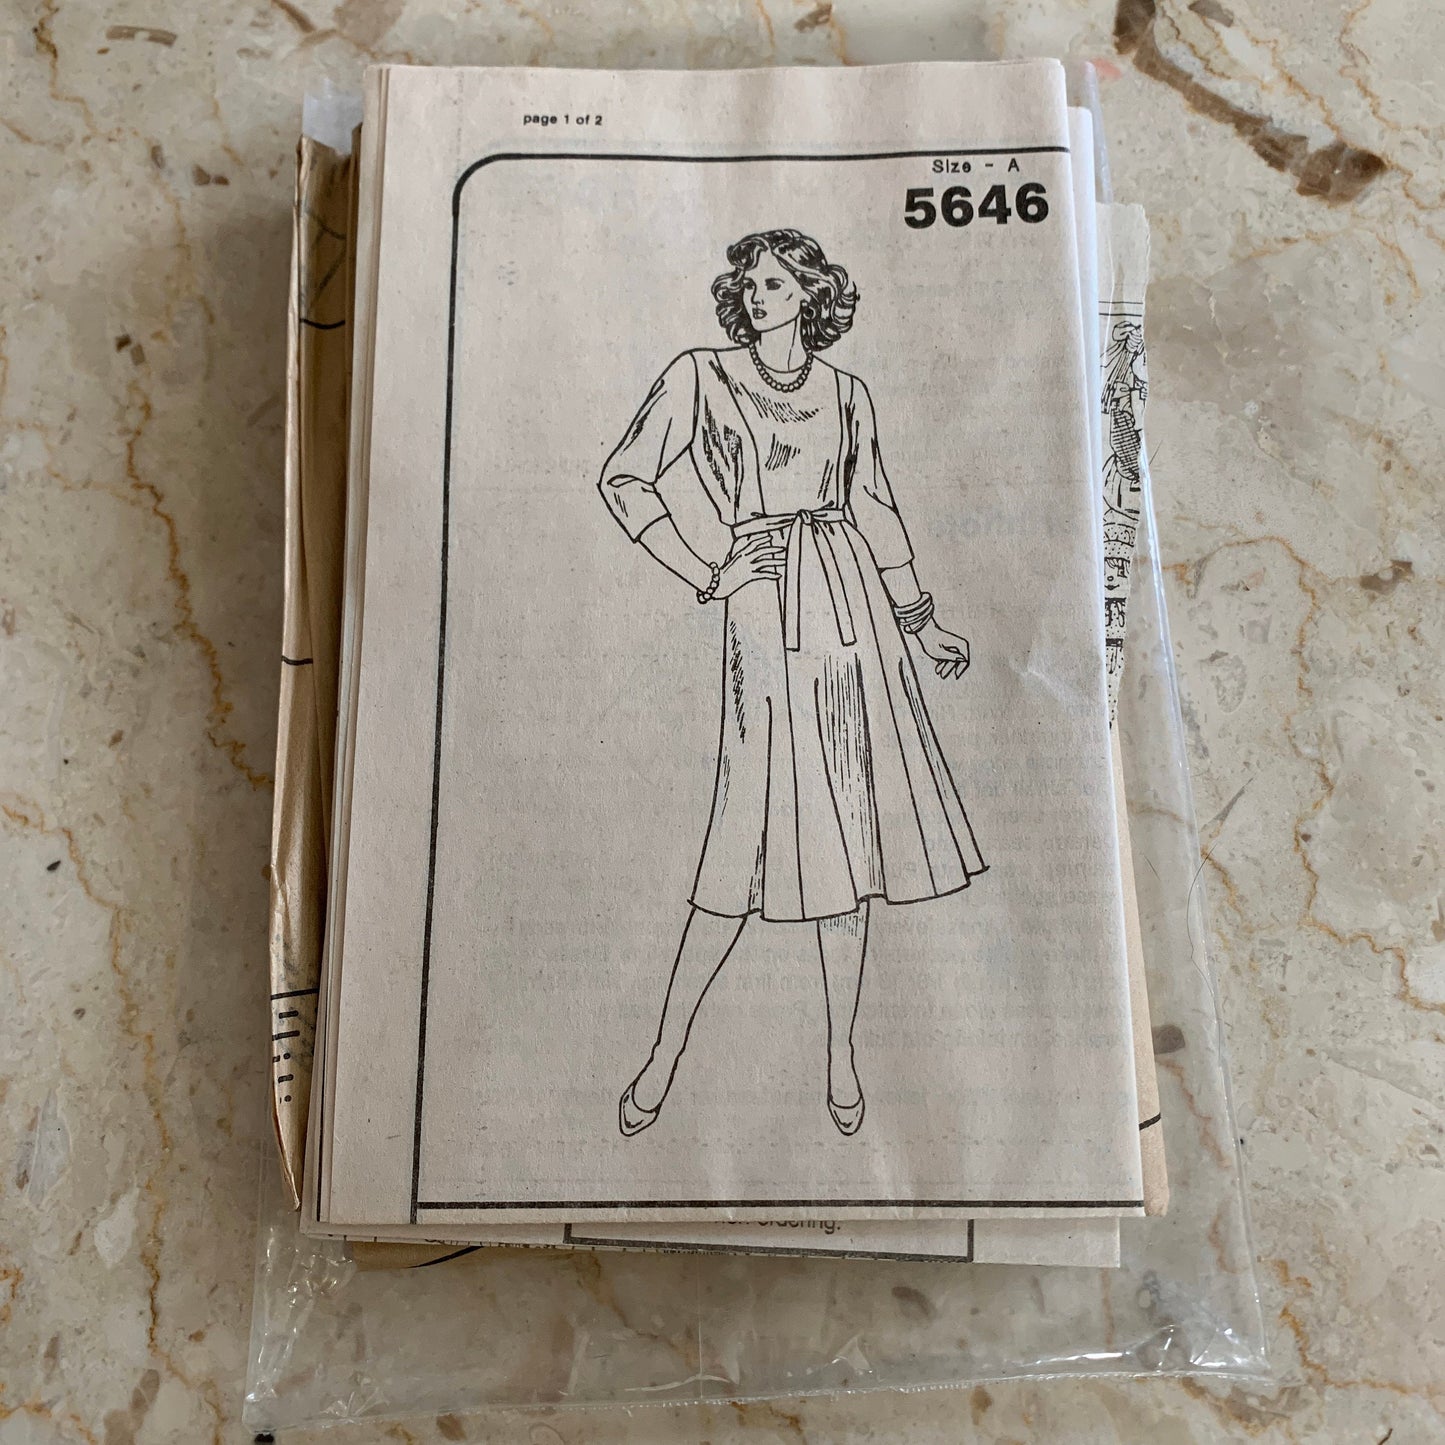 Lady’s Belted Dress with 3 Sleeve Lengths Vintage Sewing Pattern Below the Knee Size 14 to 24